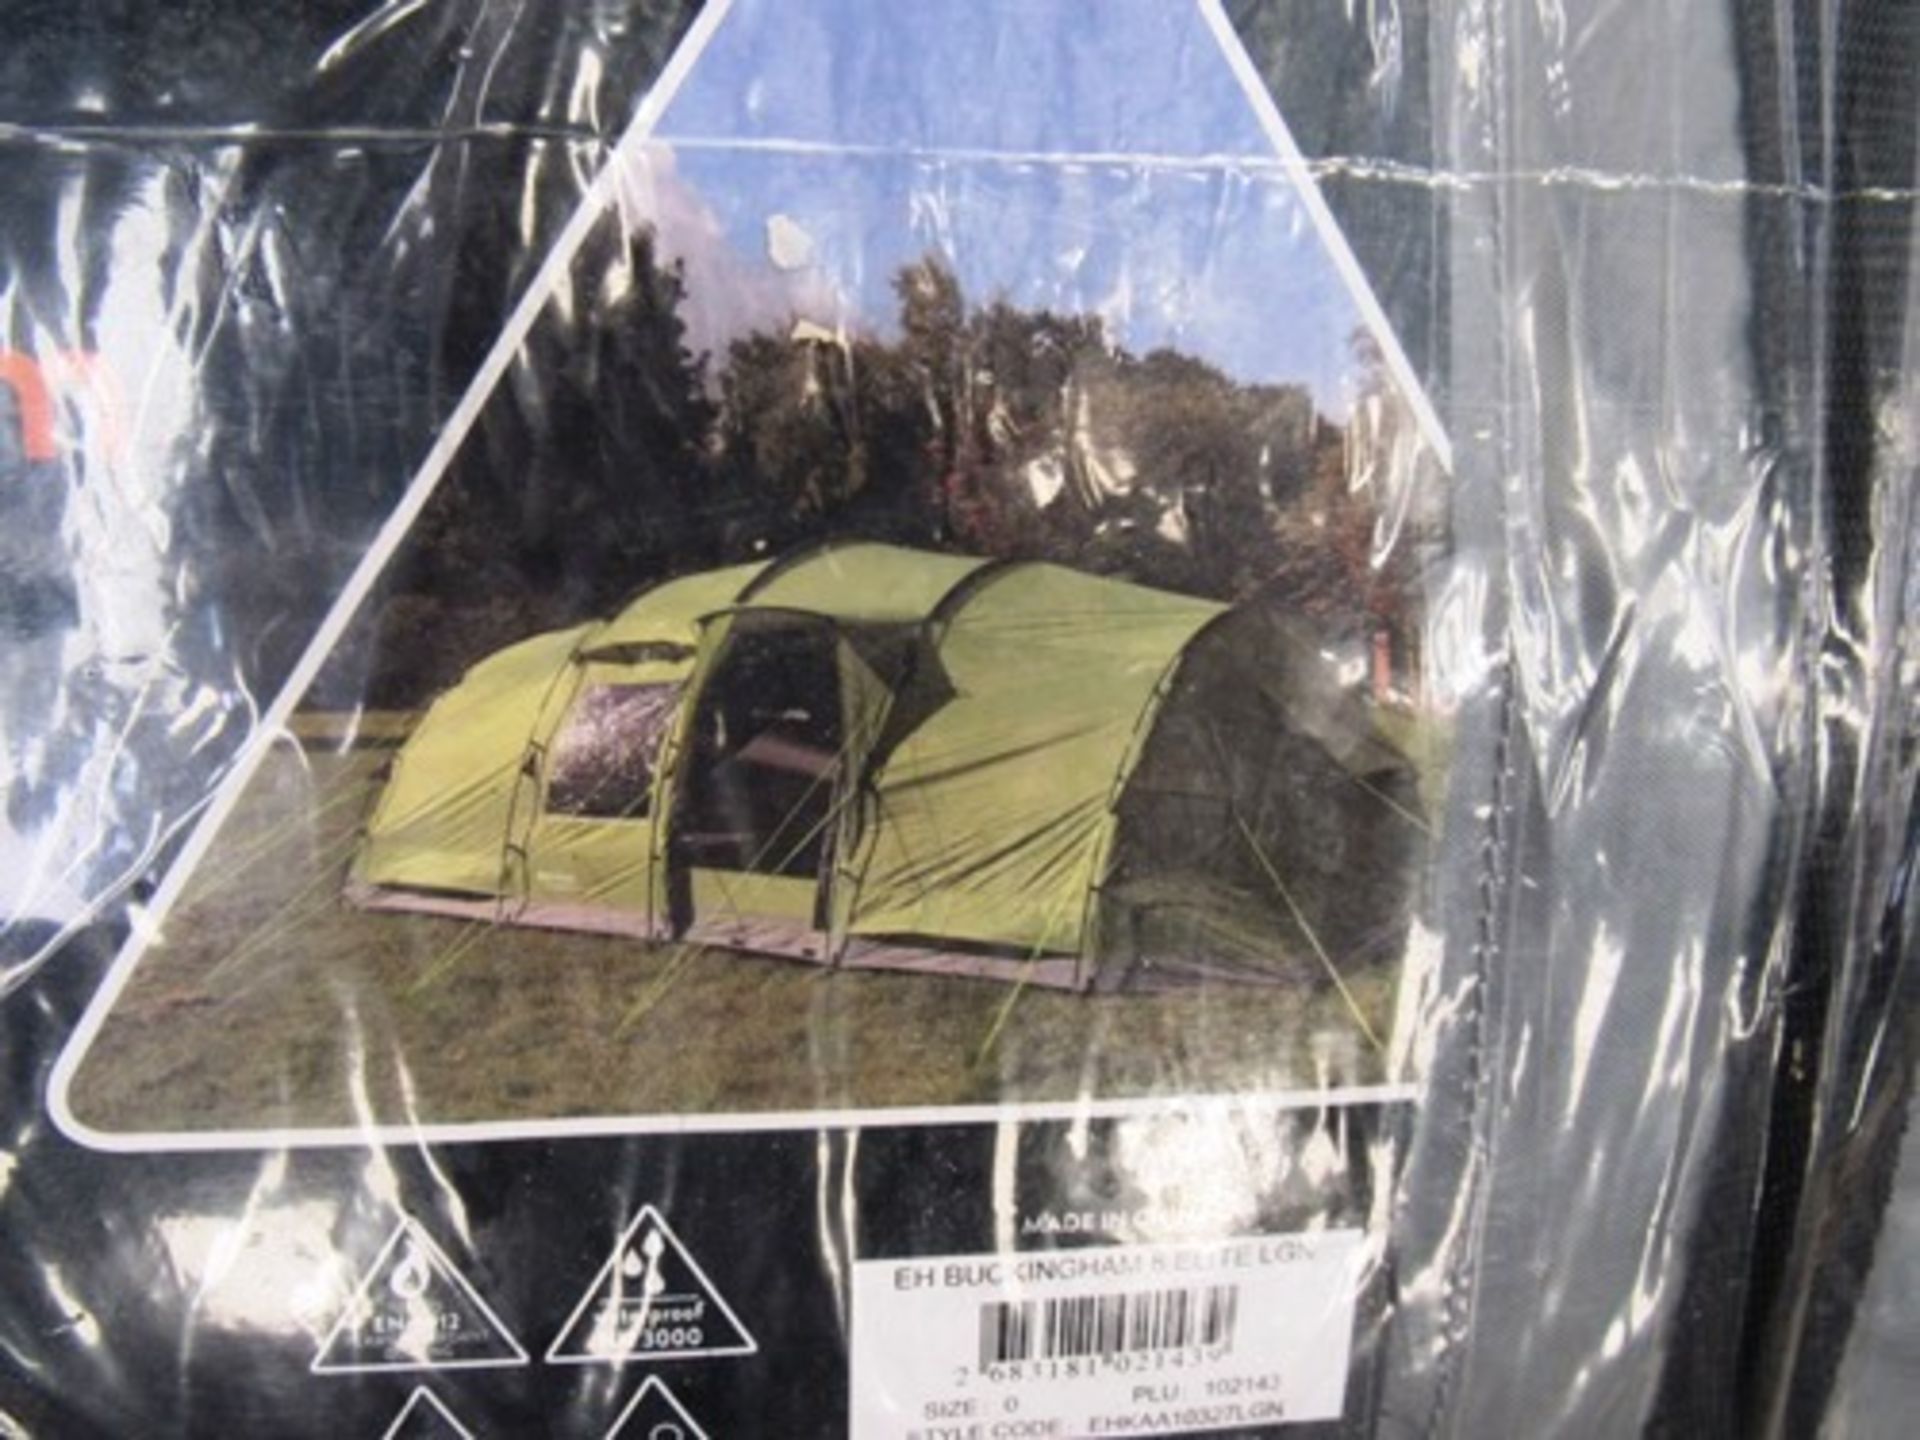 1 x Eurohike Buckingham 8 Elite tent, size 0, style code EHKAA10327LGN - New with tags (GS8) - Image 3 of 3